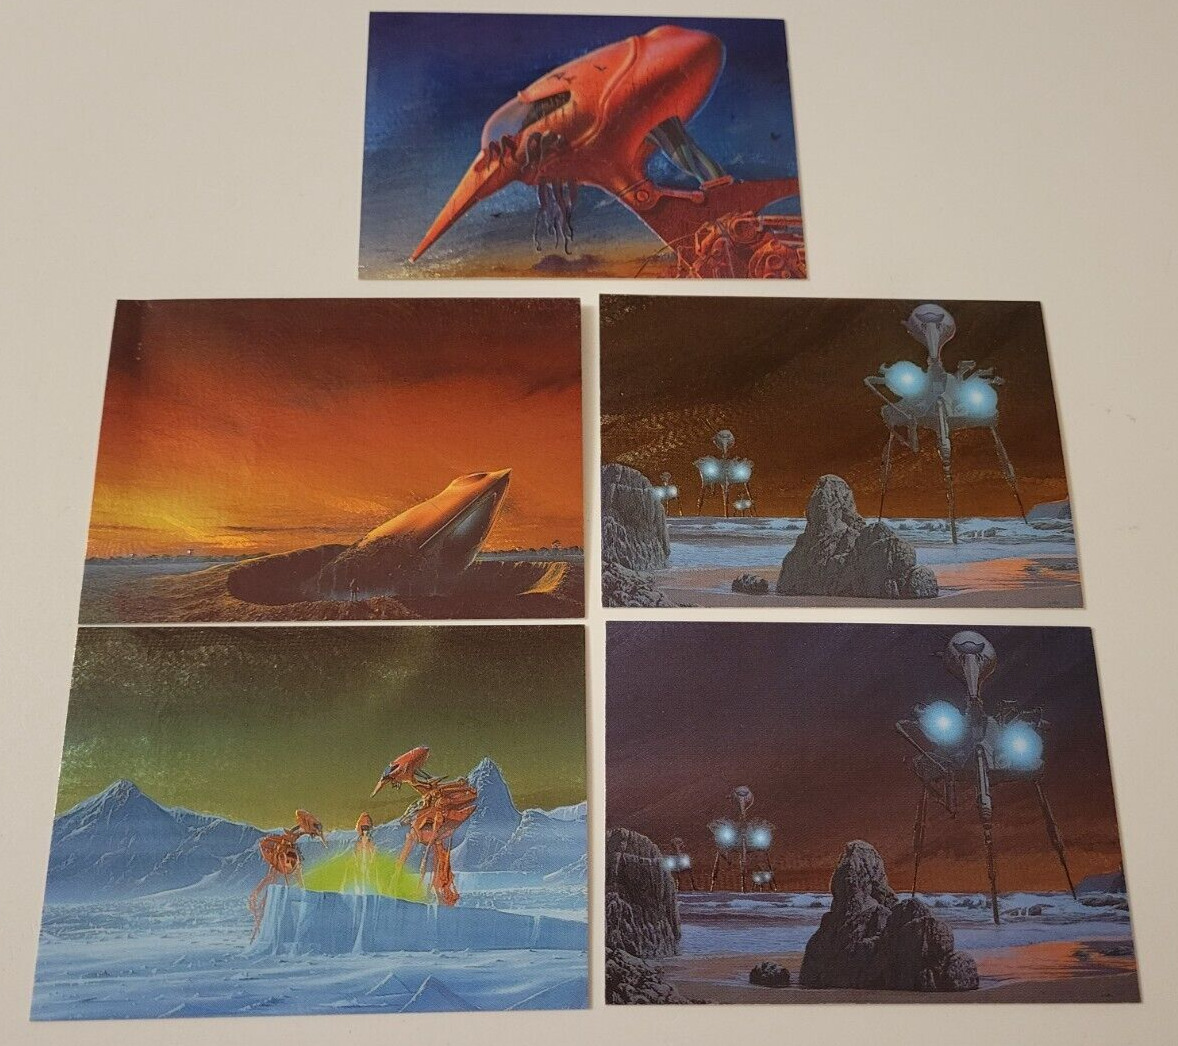 1993 ROGER DEAN FPG Metallic Storm CHASE INSERT CARDS MS2 MS3 MS4 MS5 MS5 NM/MT